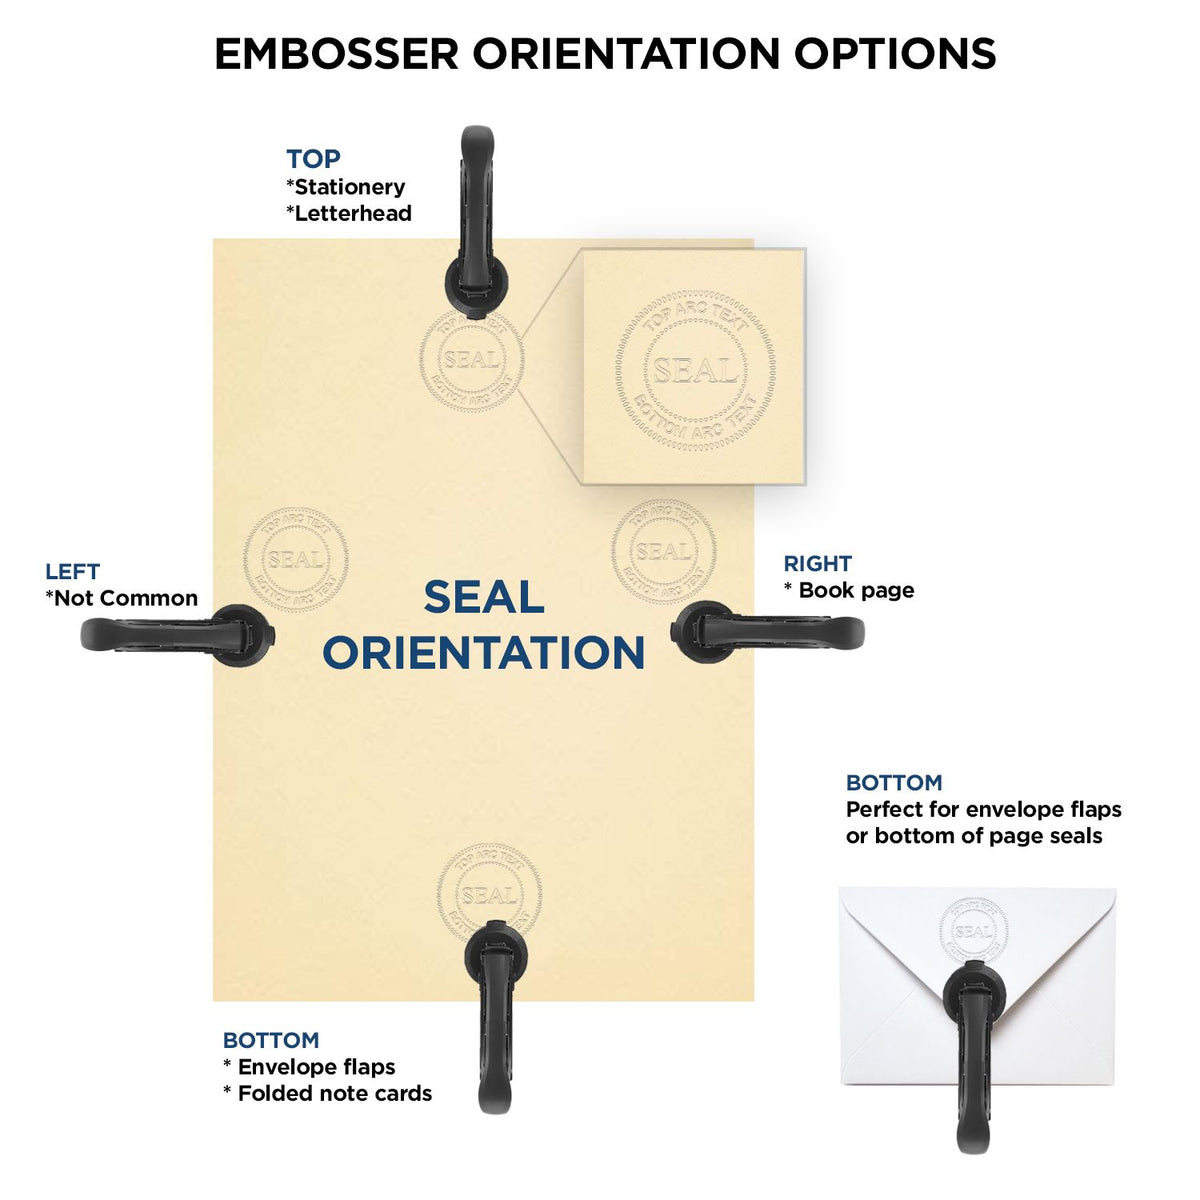 An infographic for the North Carolina Geologist Desk Seal showing embosser orientation, this is showing examples of a top, bottom, right and left insert.